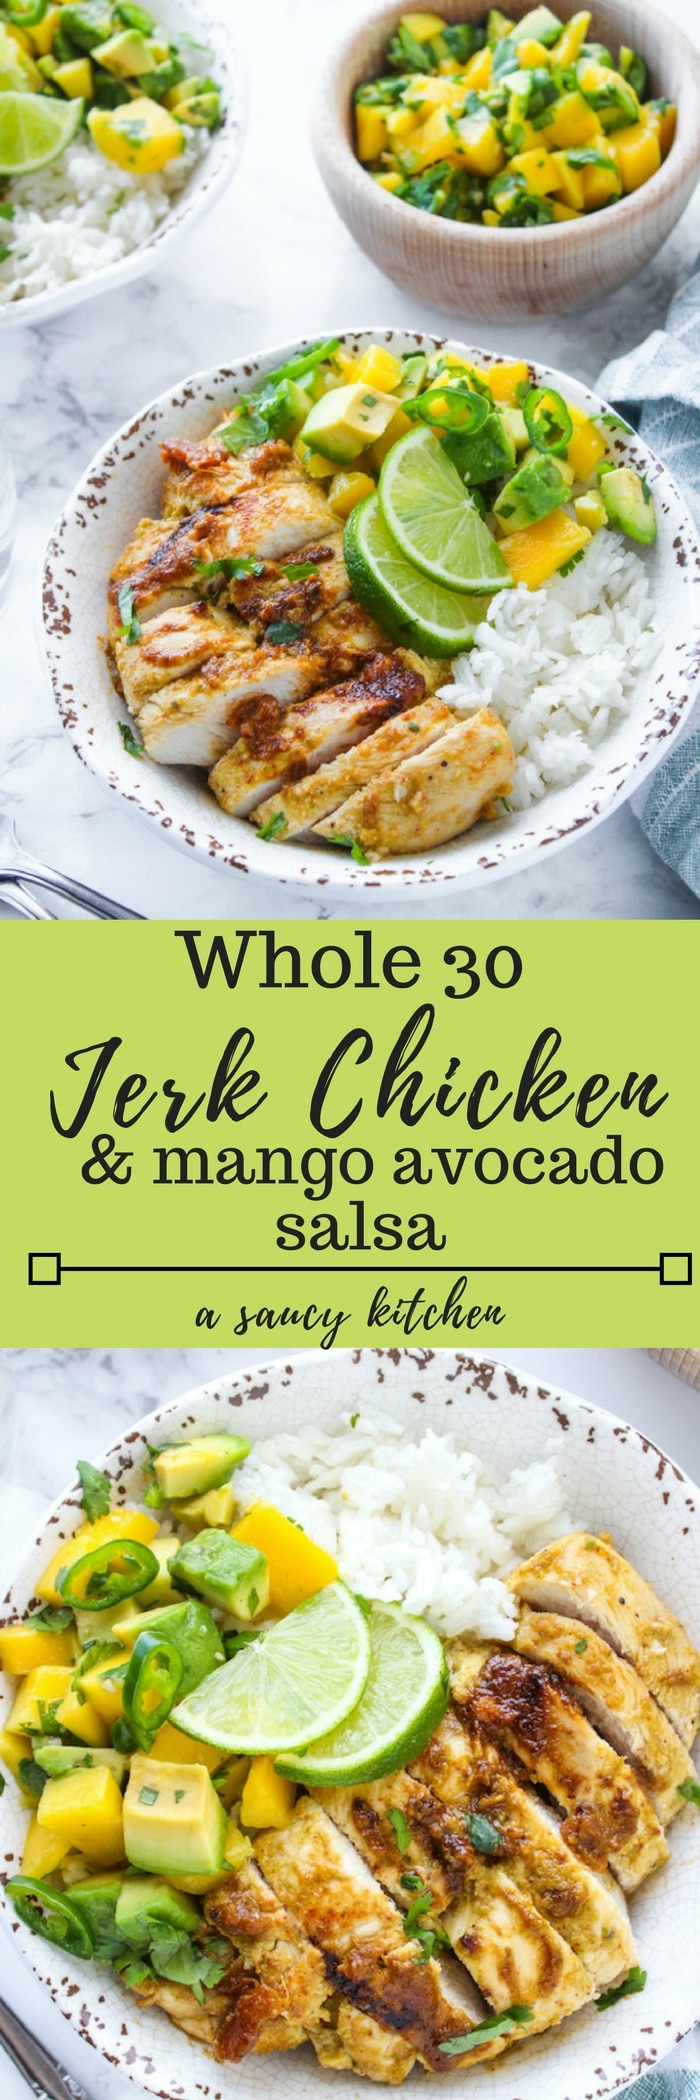 Whole 30 friendly Jerk Chicken with a simple mango & avocado salsa - sweet, spicy, and packed with flavor. Paleo & Gluten Free